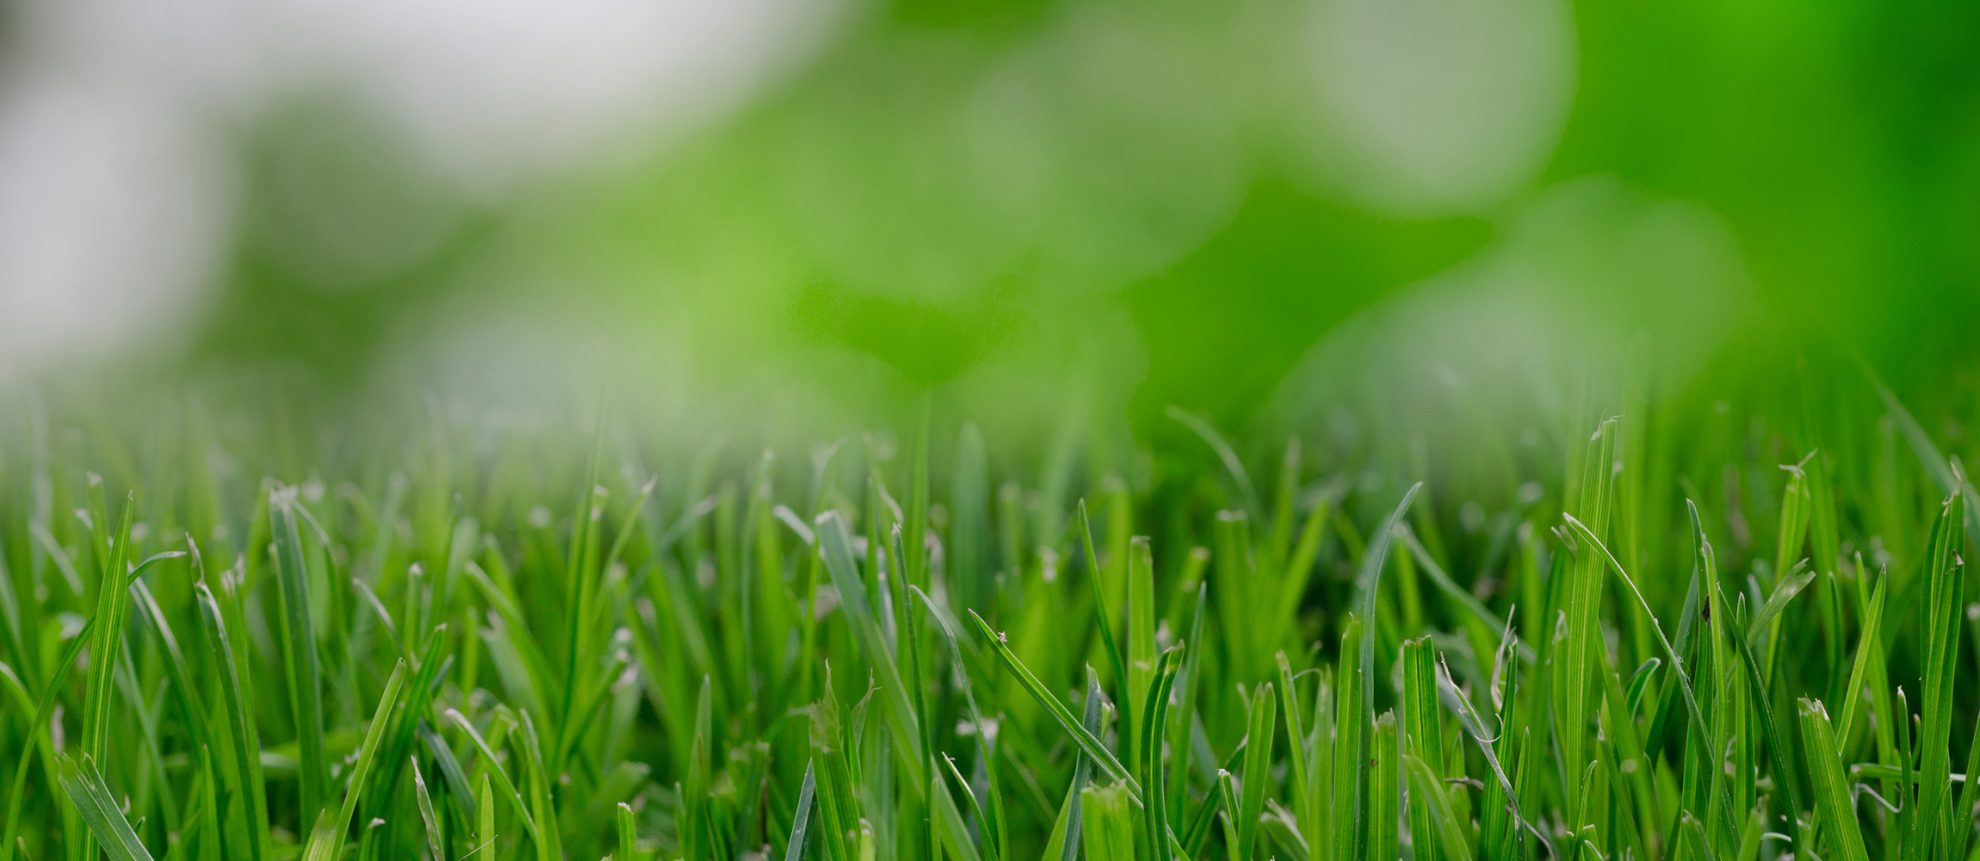 Grass Cutting Services Annapolis Landscaping